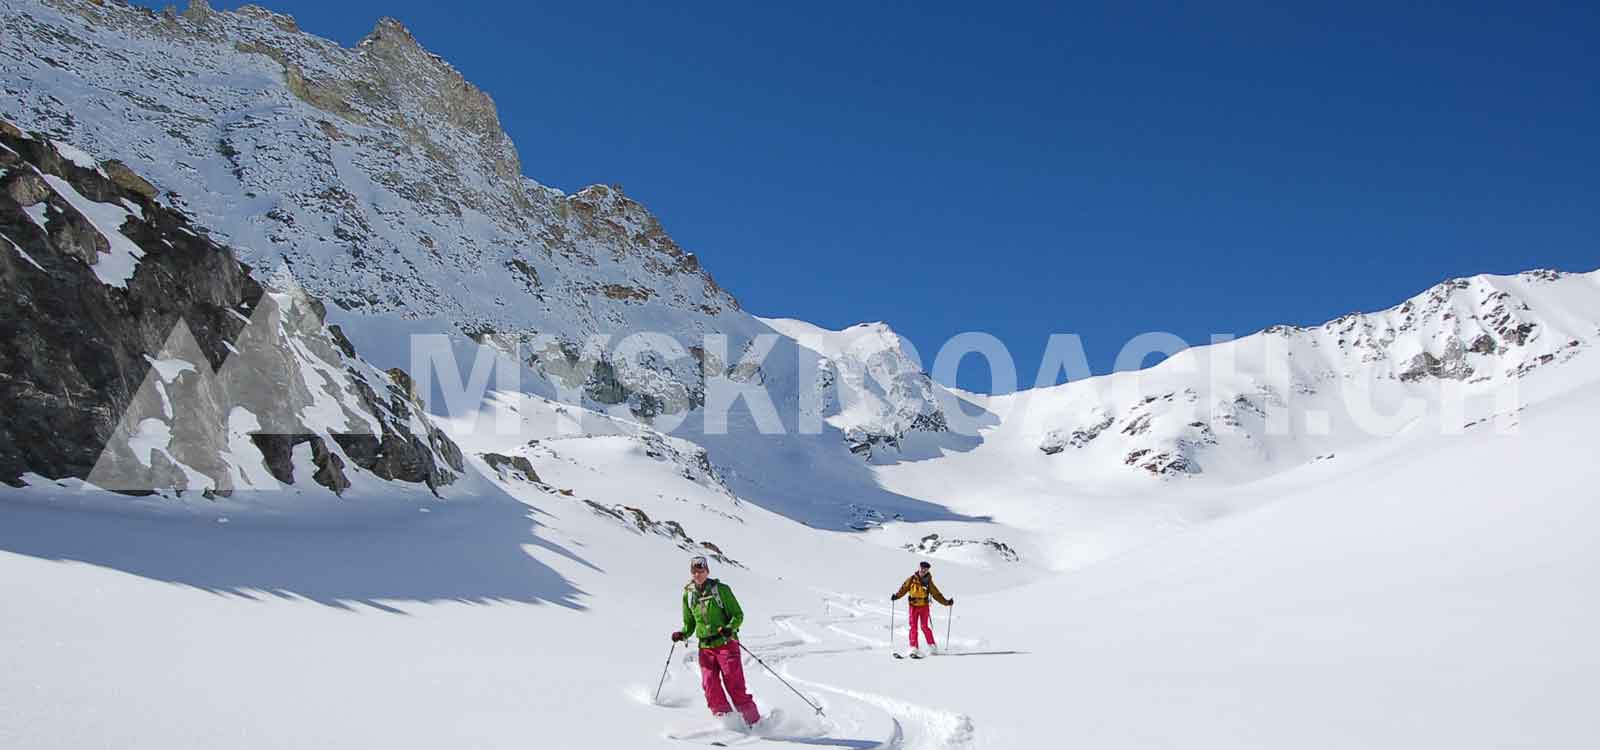 [:fr]MYSKICOACH.CH VALAIS-SUISSE. Cours de ski, formation freeride, hors-piste pour adultes et adolescents de niveau avancé[:en]MYSKICOACH.CH VALAIS-SWITZERLAND Ski, freeride instruction and off-piste private coaching for adults and teenagers from beginner to intermediate level. Aiming for autonomy while discovering new spots [:]